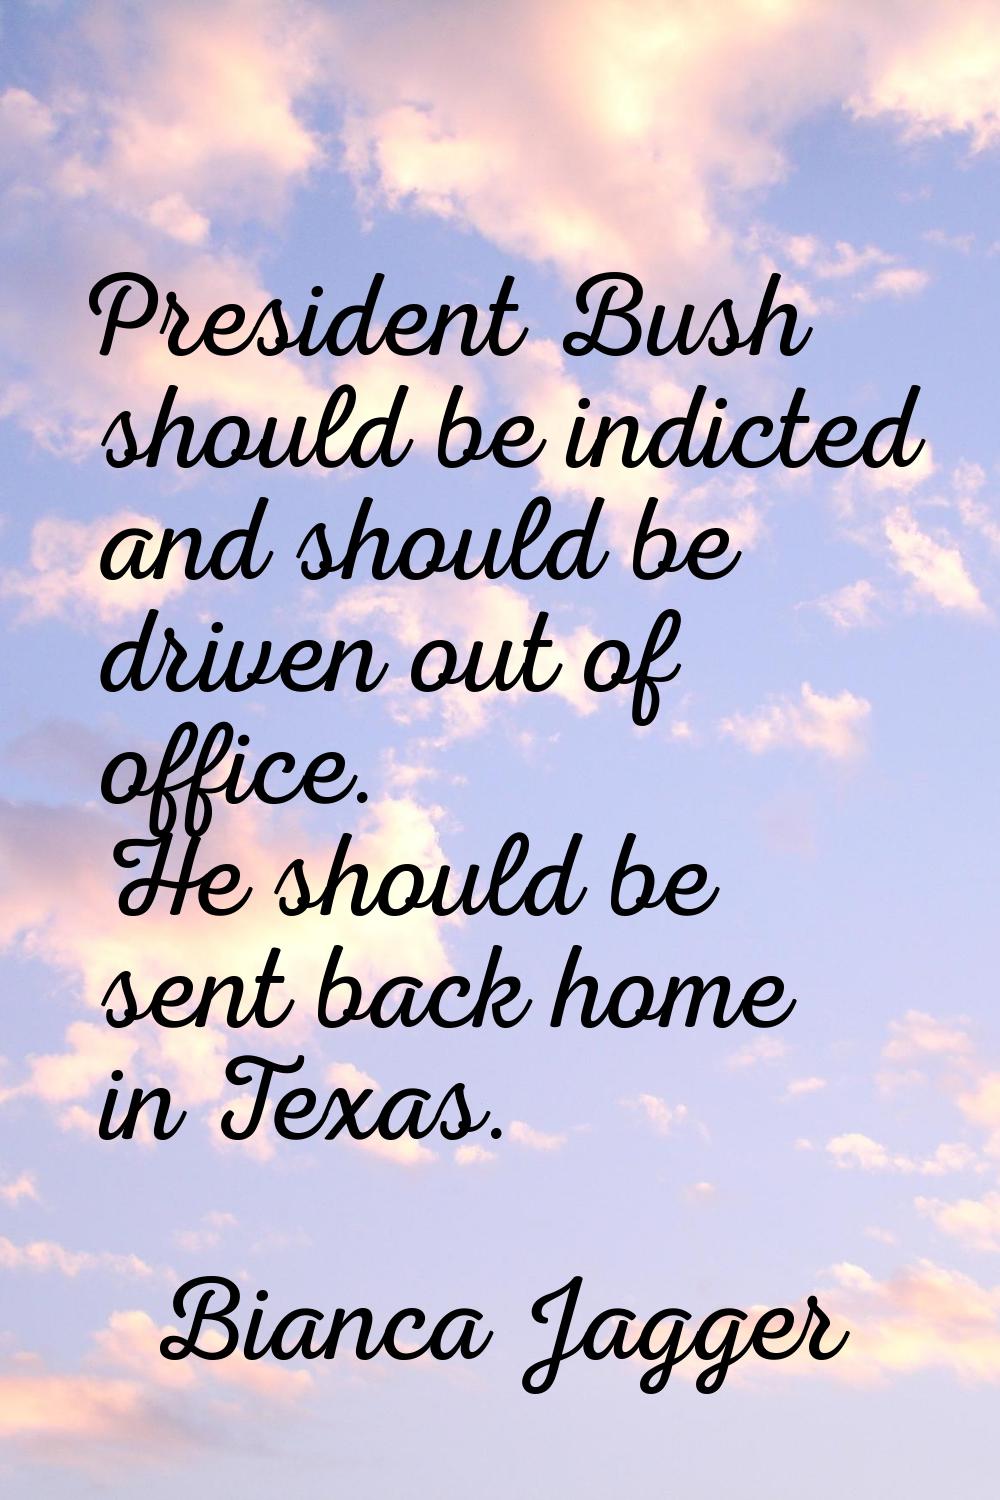 President Bush should be indicted and should be driven out of office. He should be sent back home i